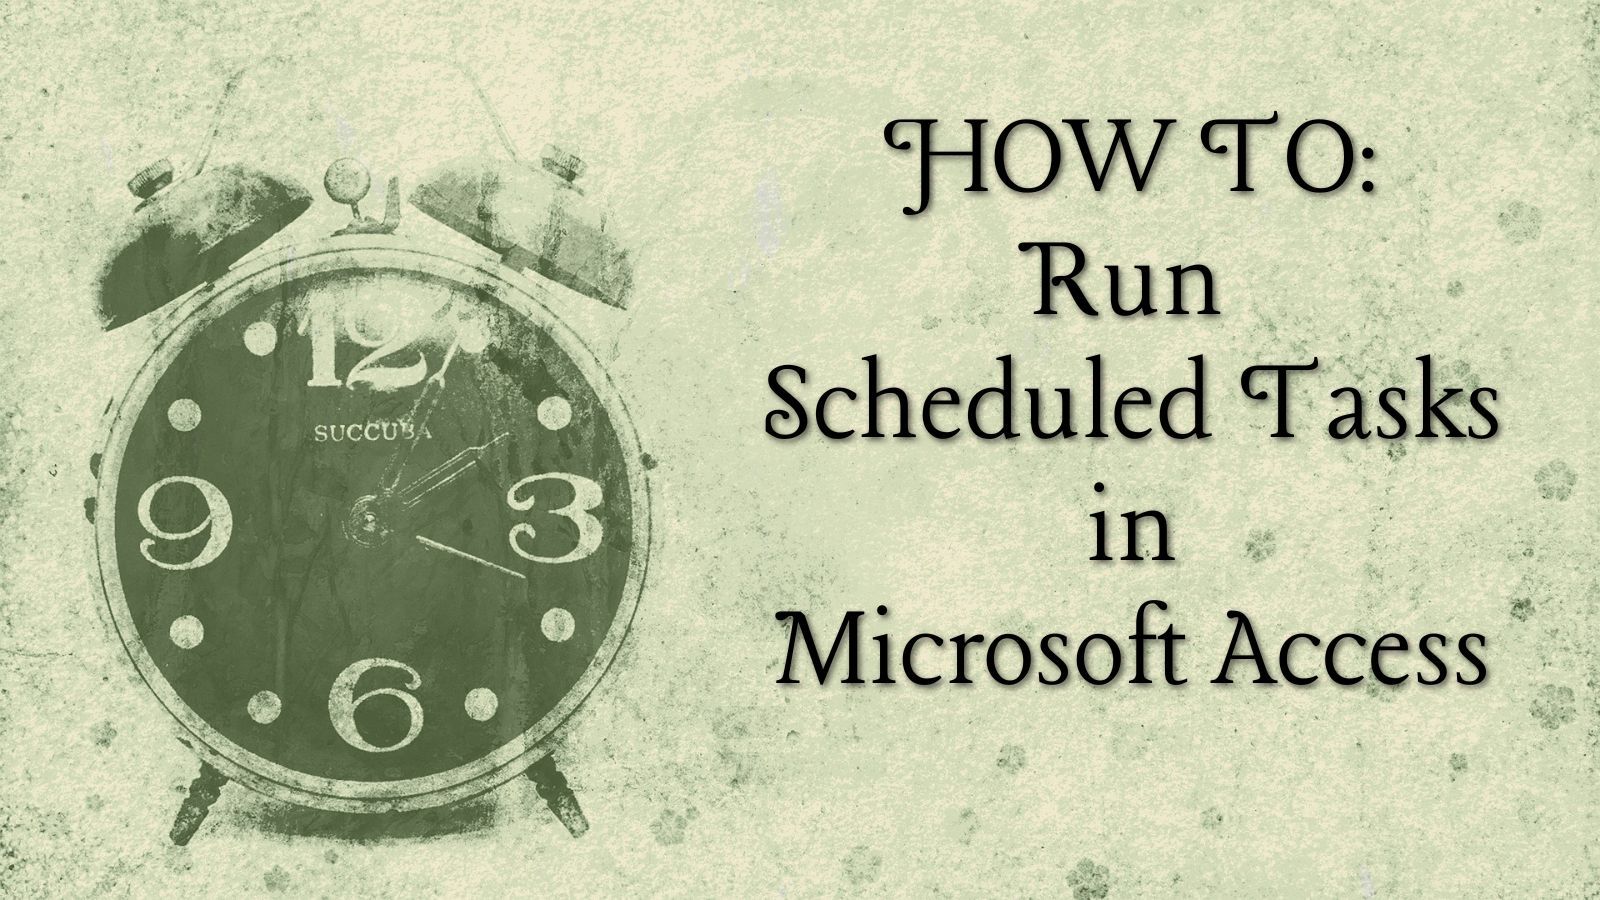 HOW TO: Run Scheduled Tasks with Microsoft Access